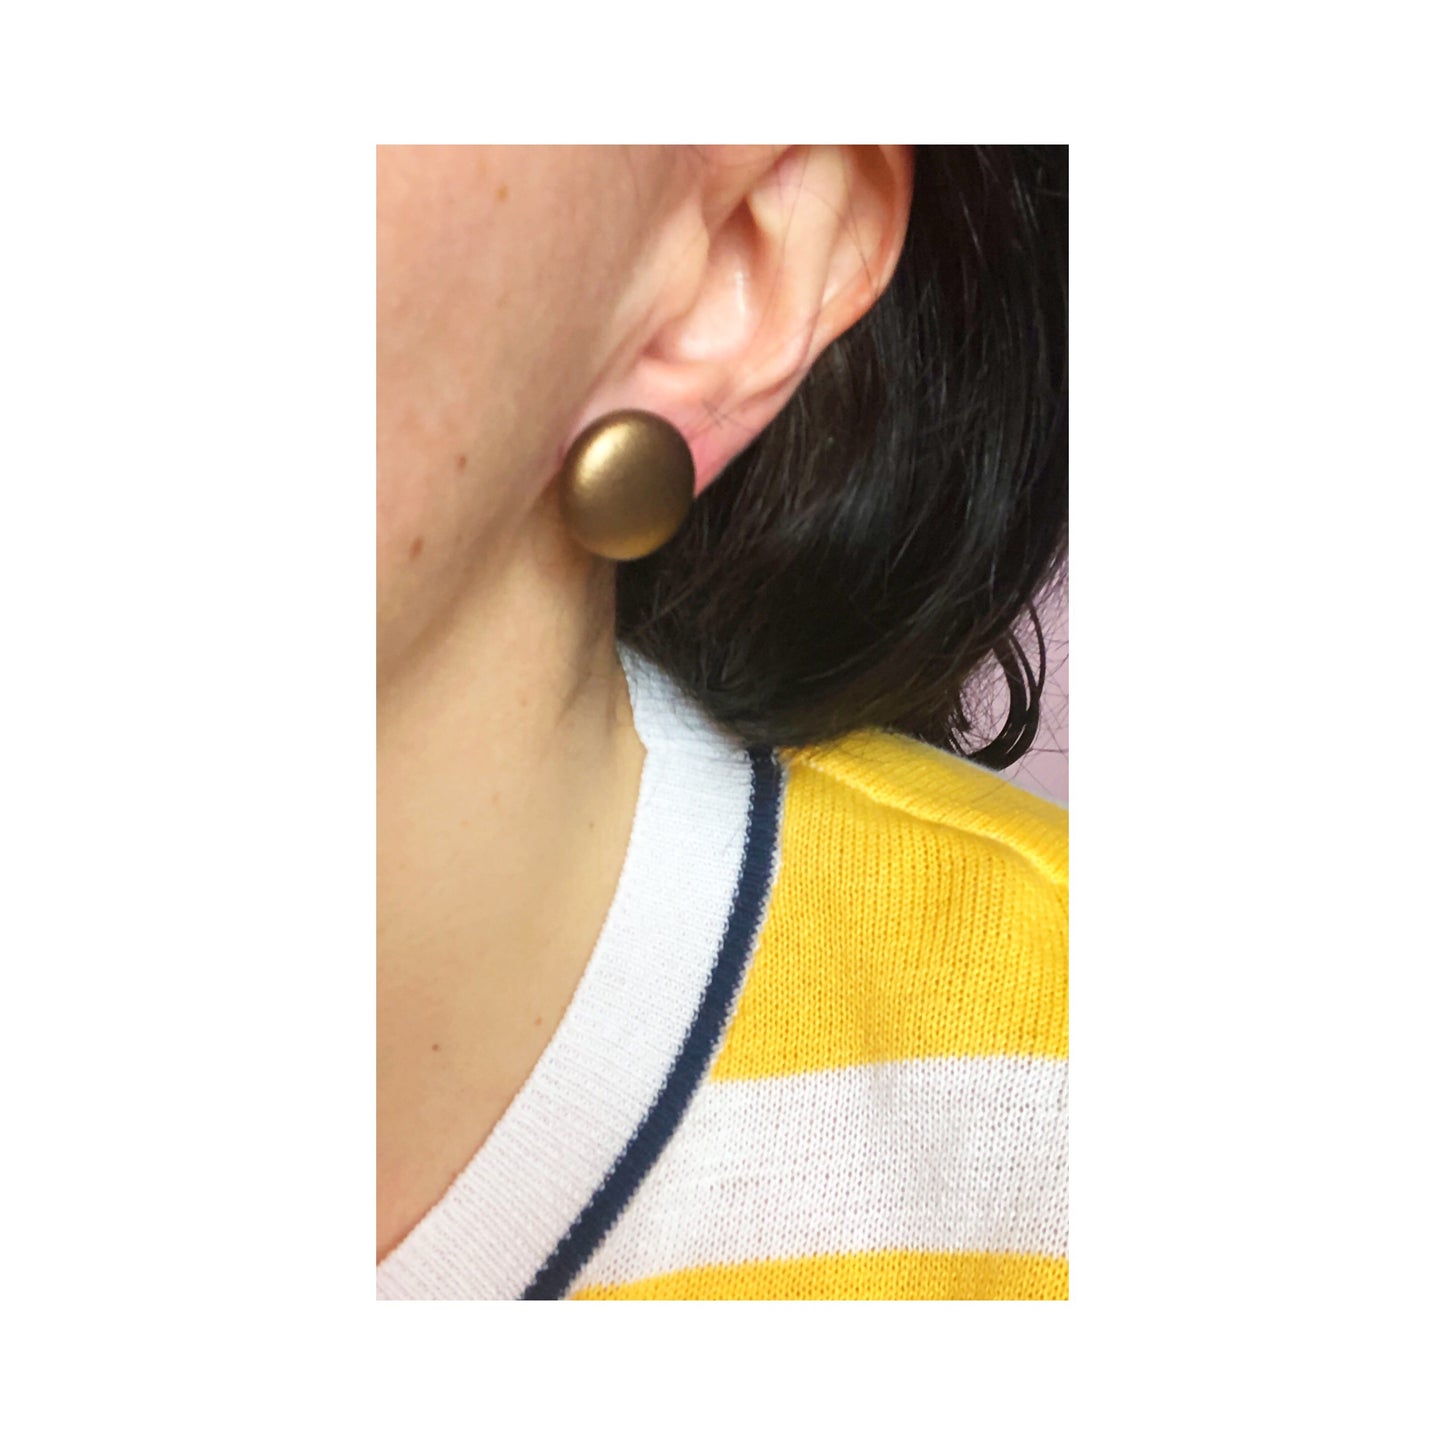 Metallic Solid Gold Fabric Button Earrings